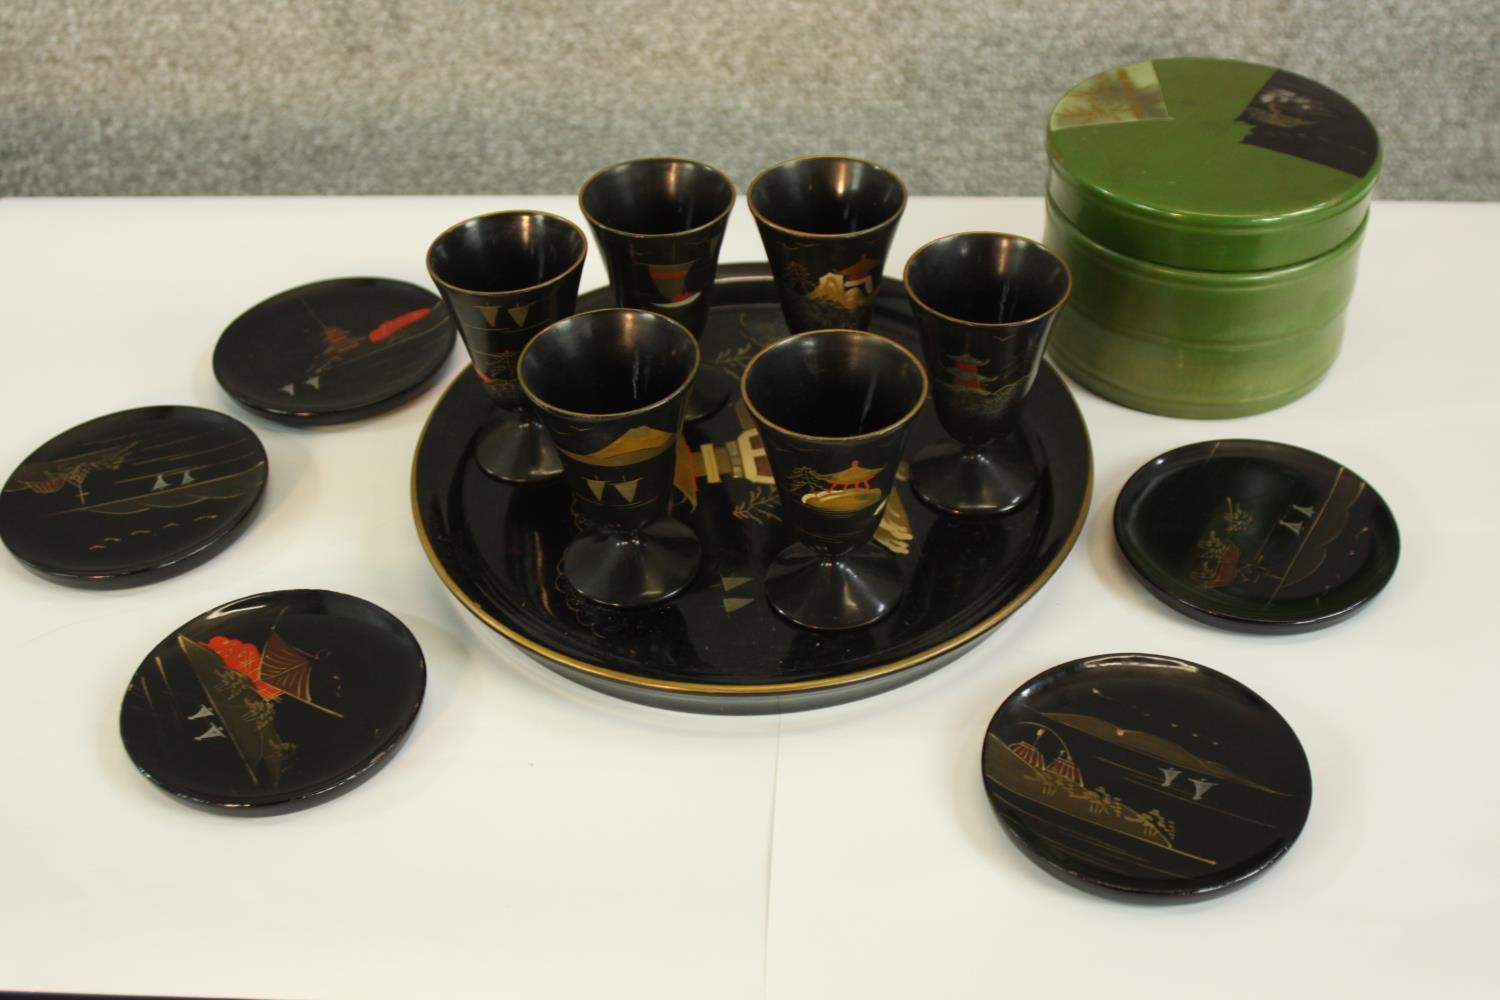 A Japanese lacquered set of six cups, a tray, five small plates housed in a round box. Each item